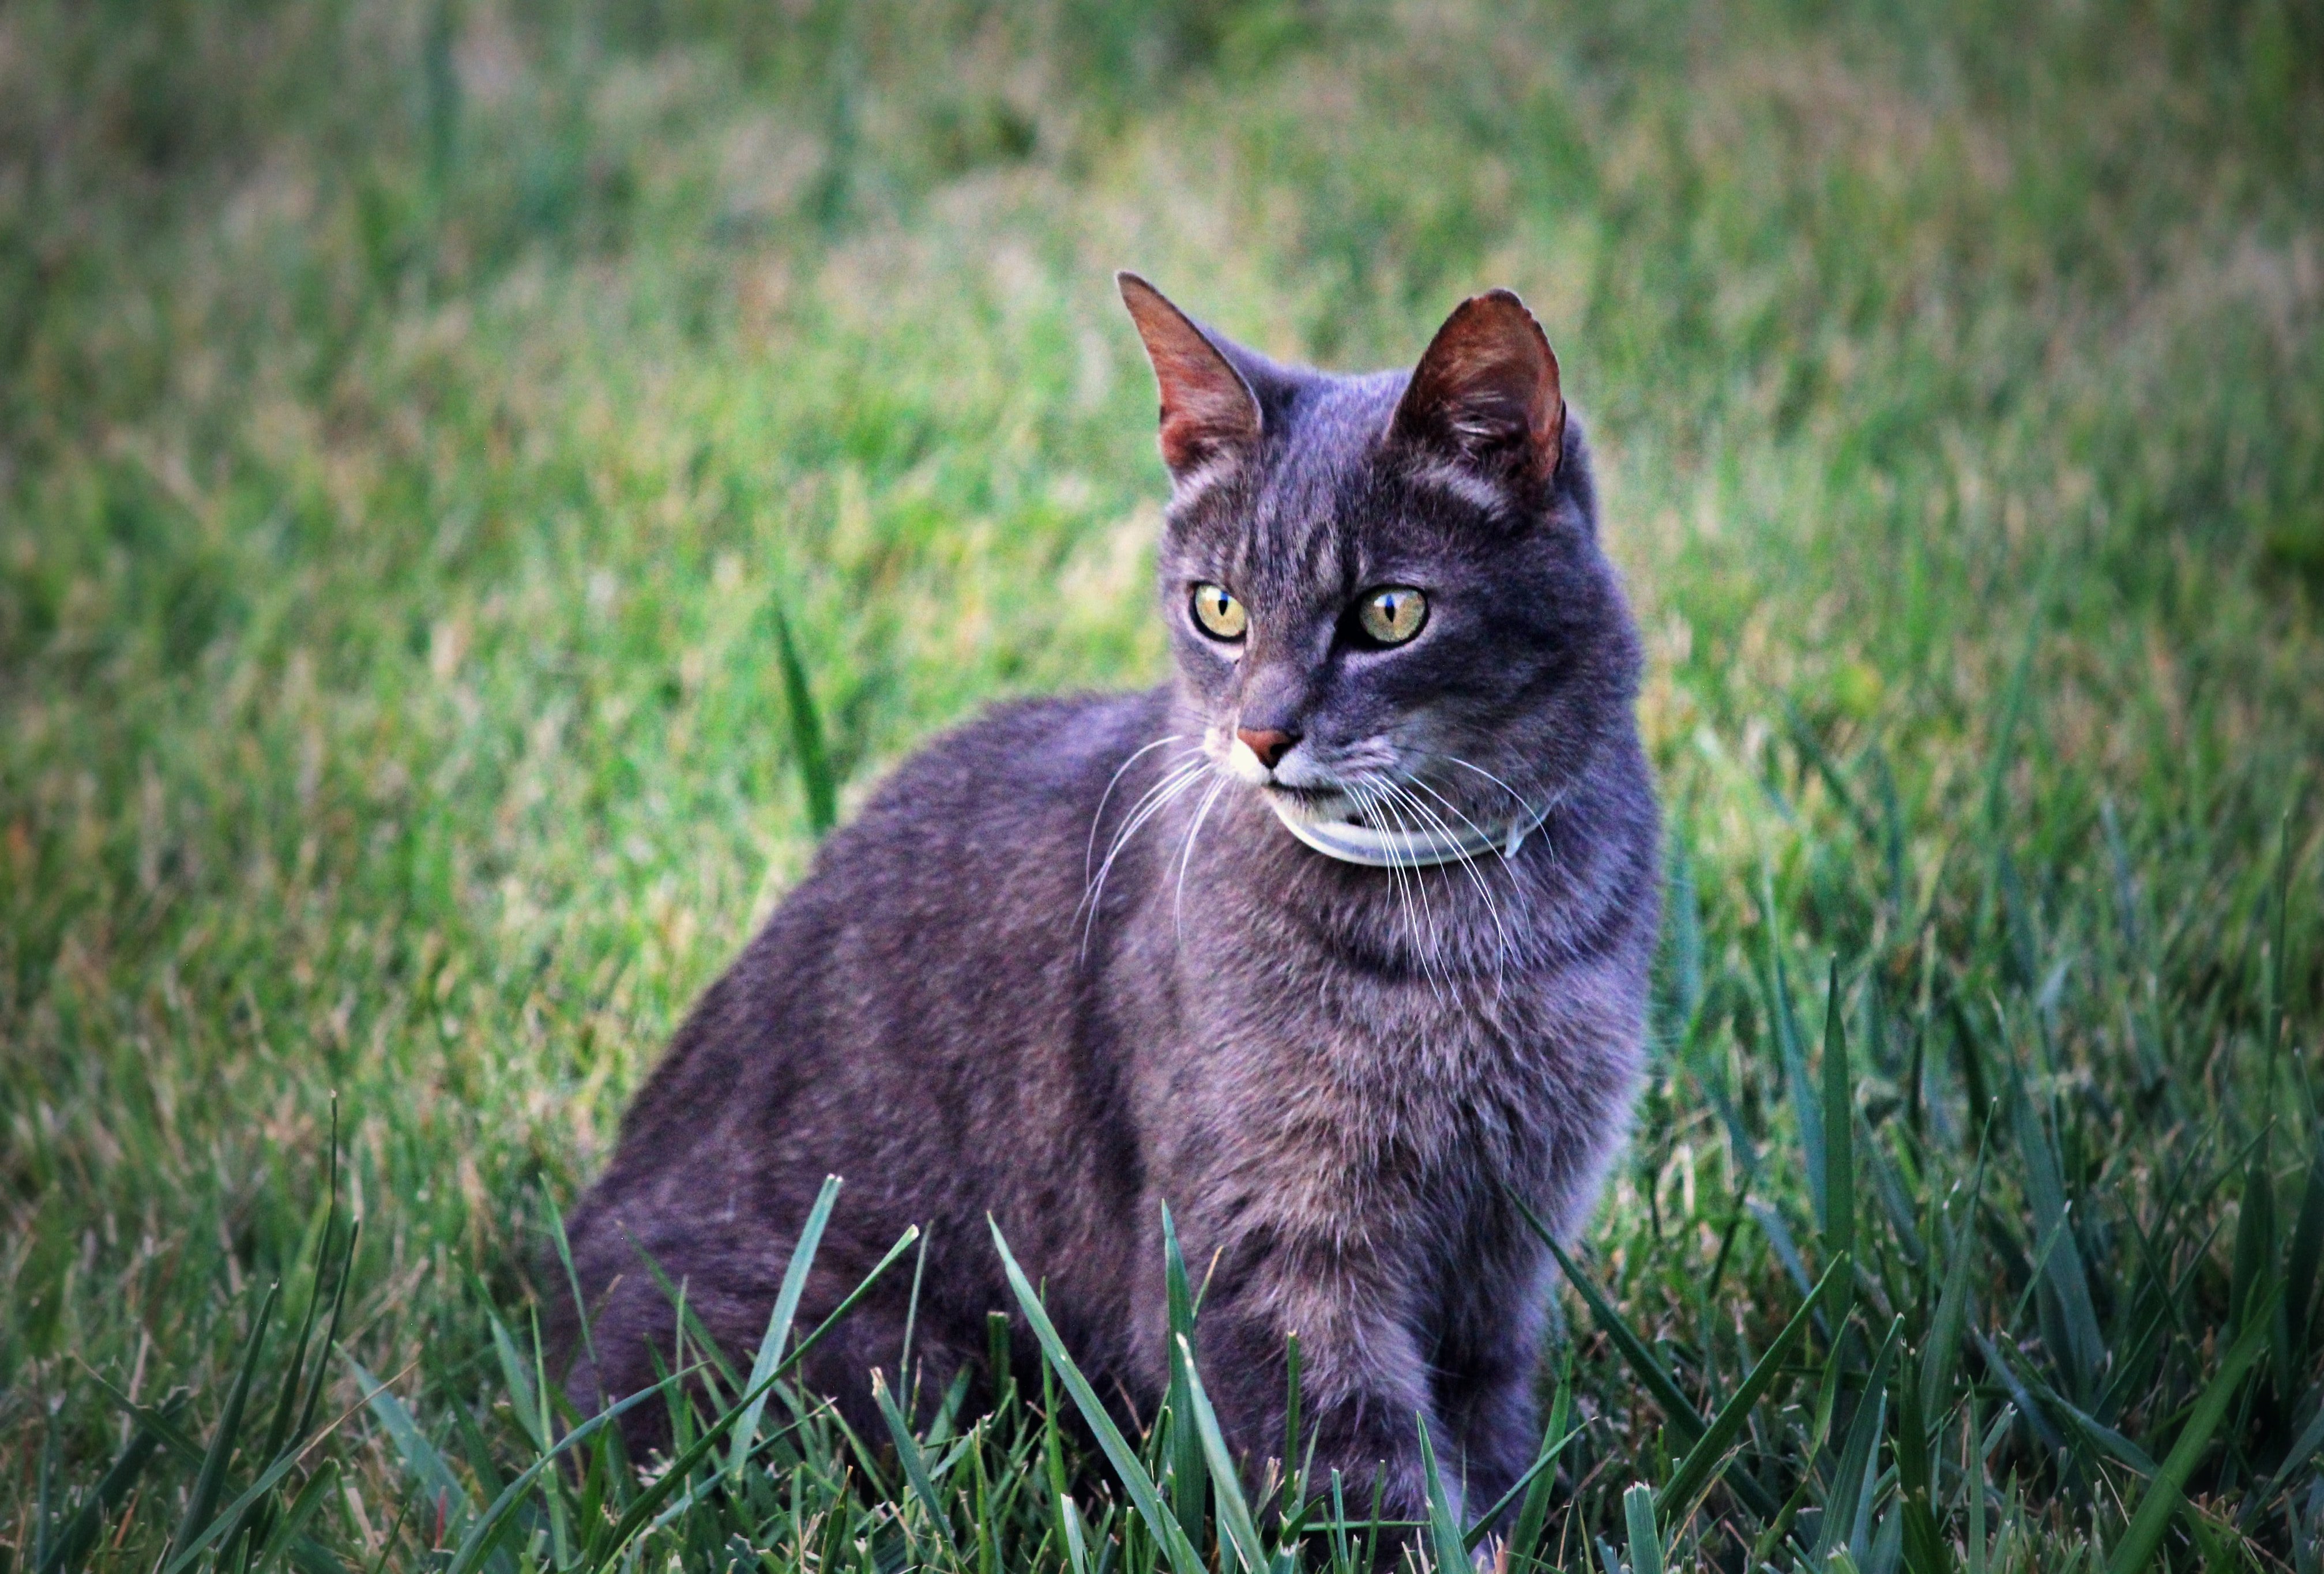 Cat photo by Sheri Hooley from Unsplash